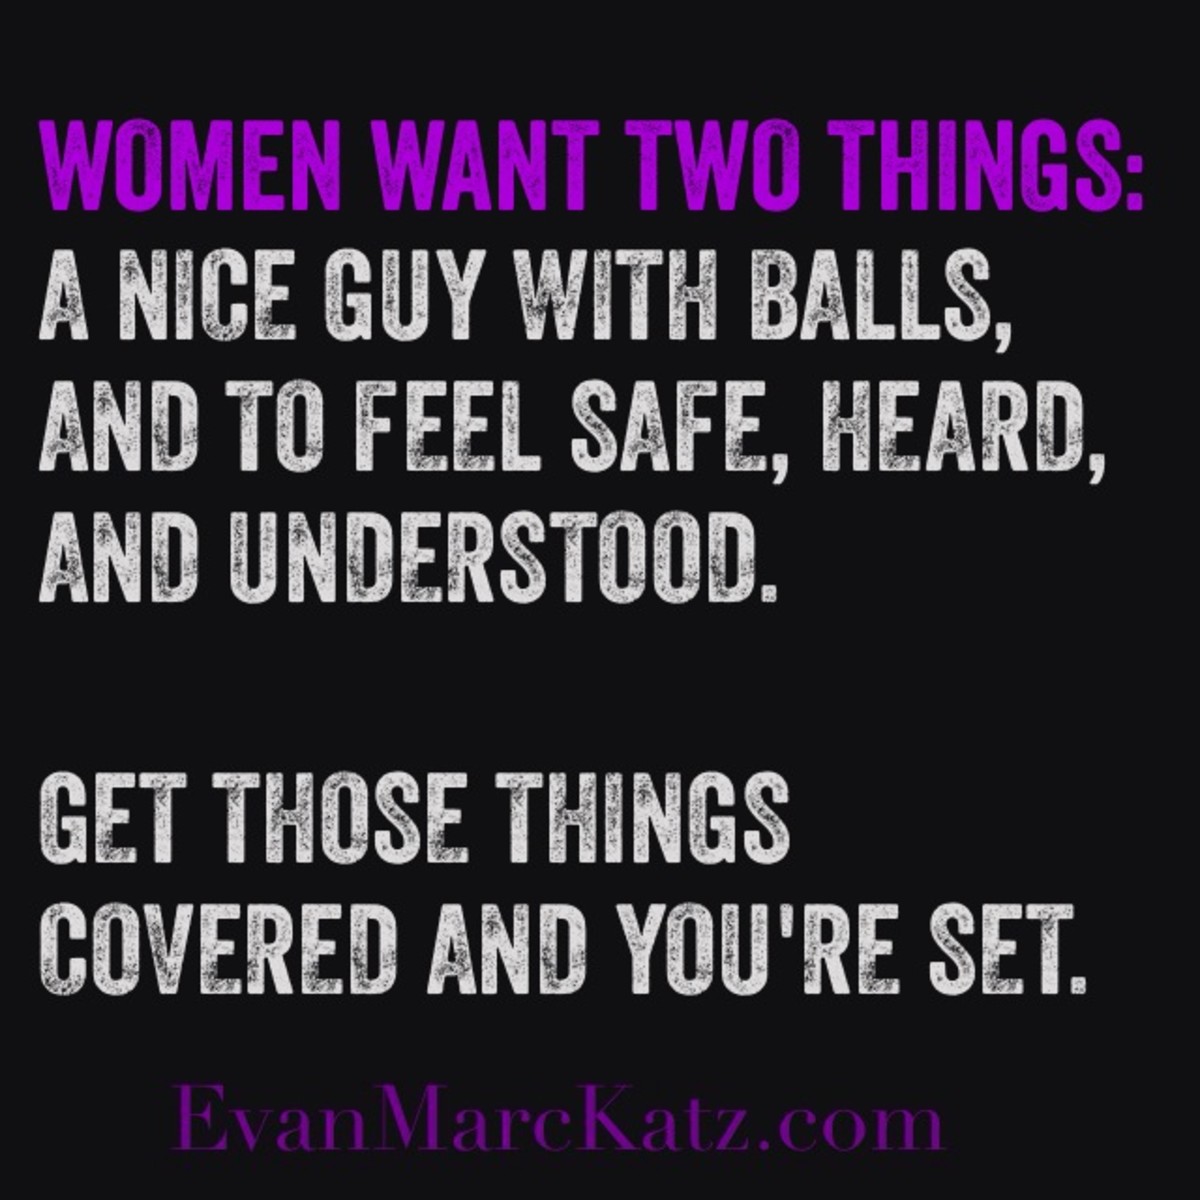 what-a-woman-wants-from-her-man-